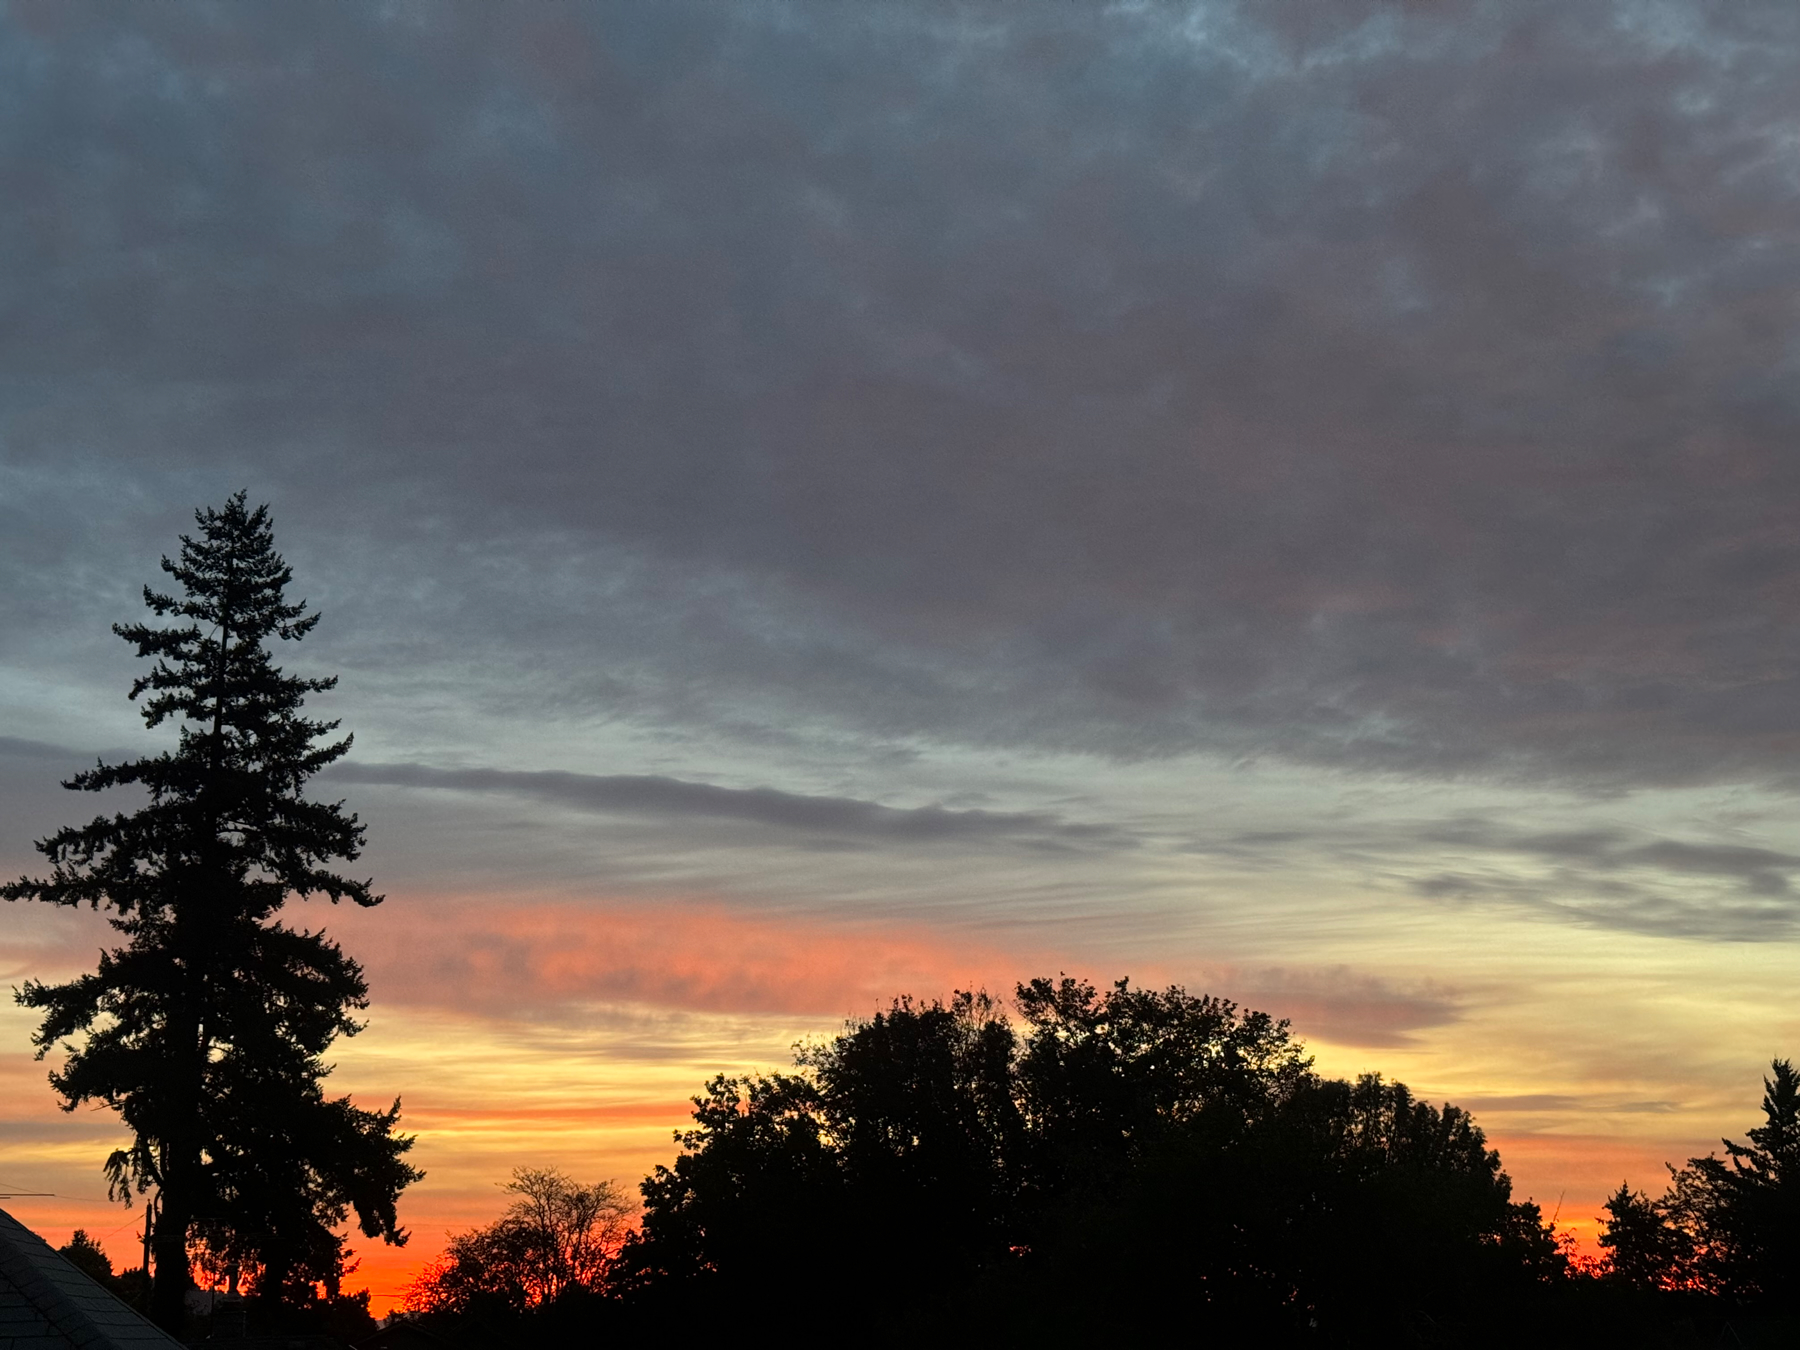 Silhouette of trees in the foreground. Orange to yellow to gray hues rising into the cloudy sky from the horizon.